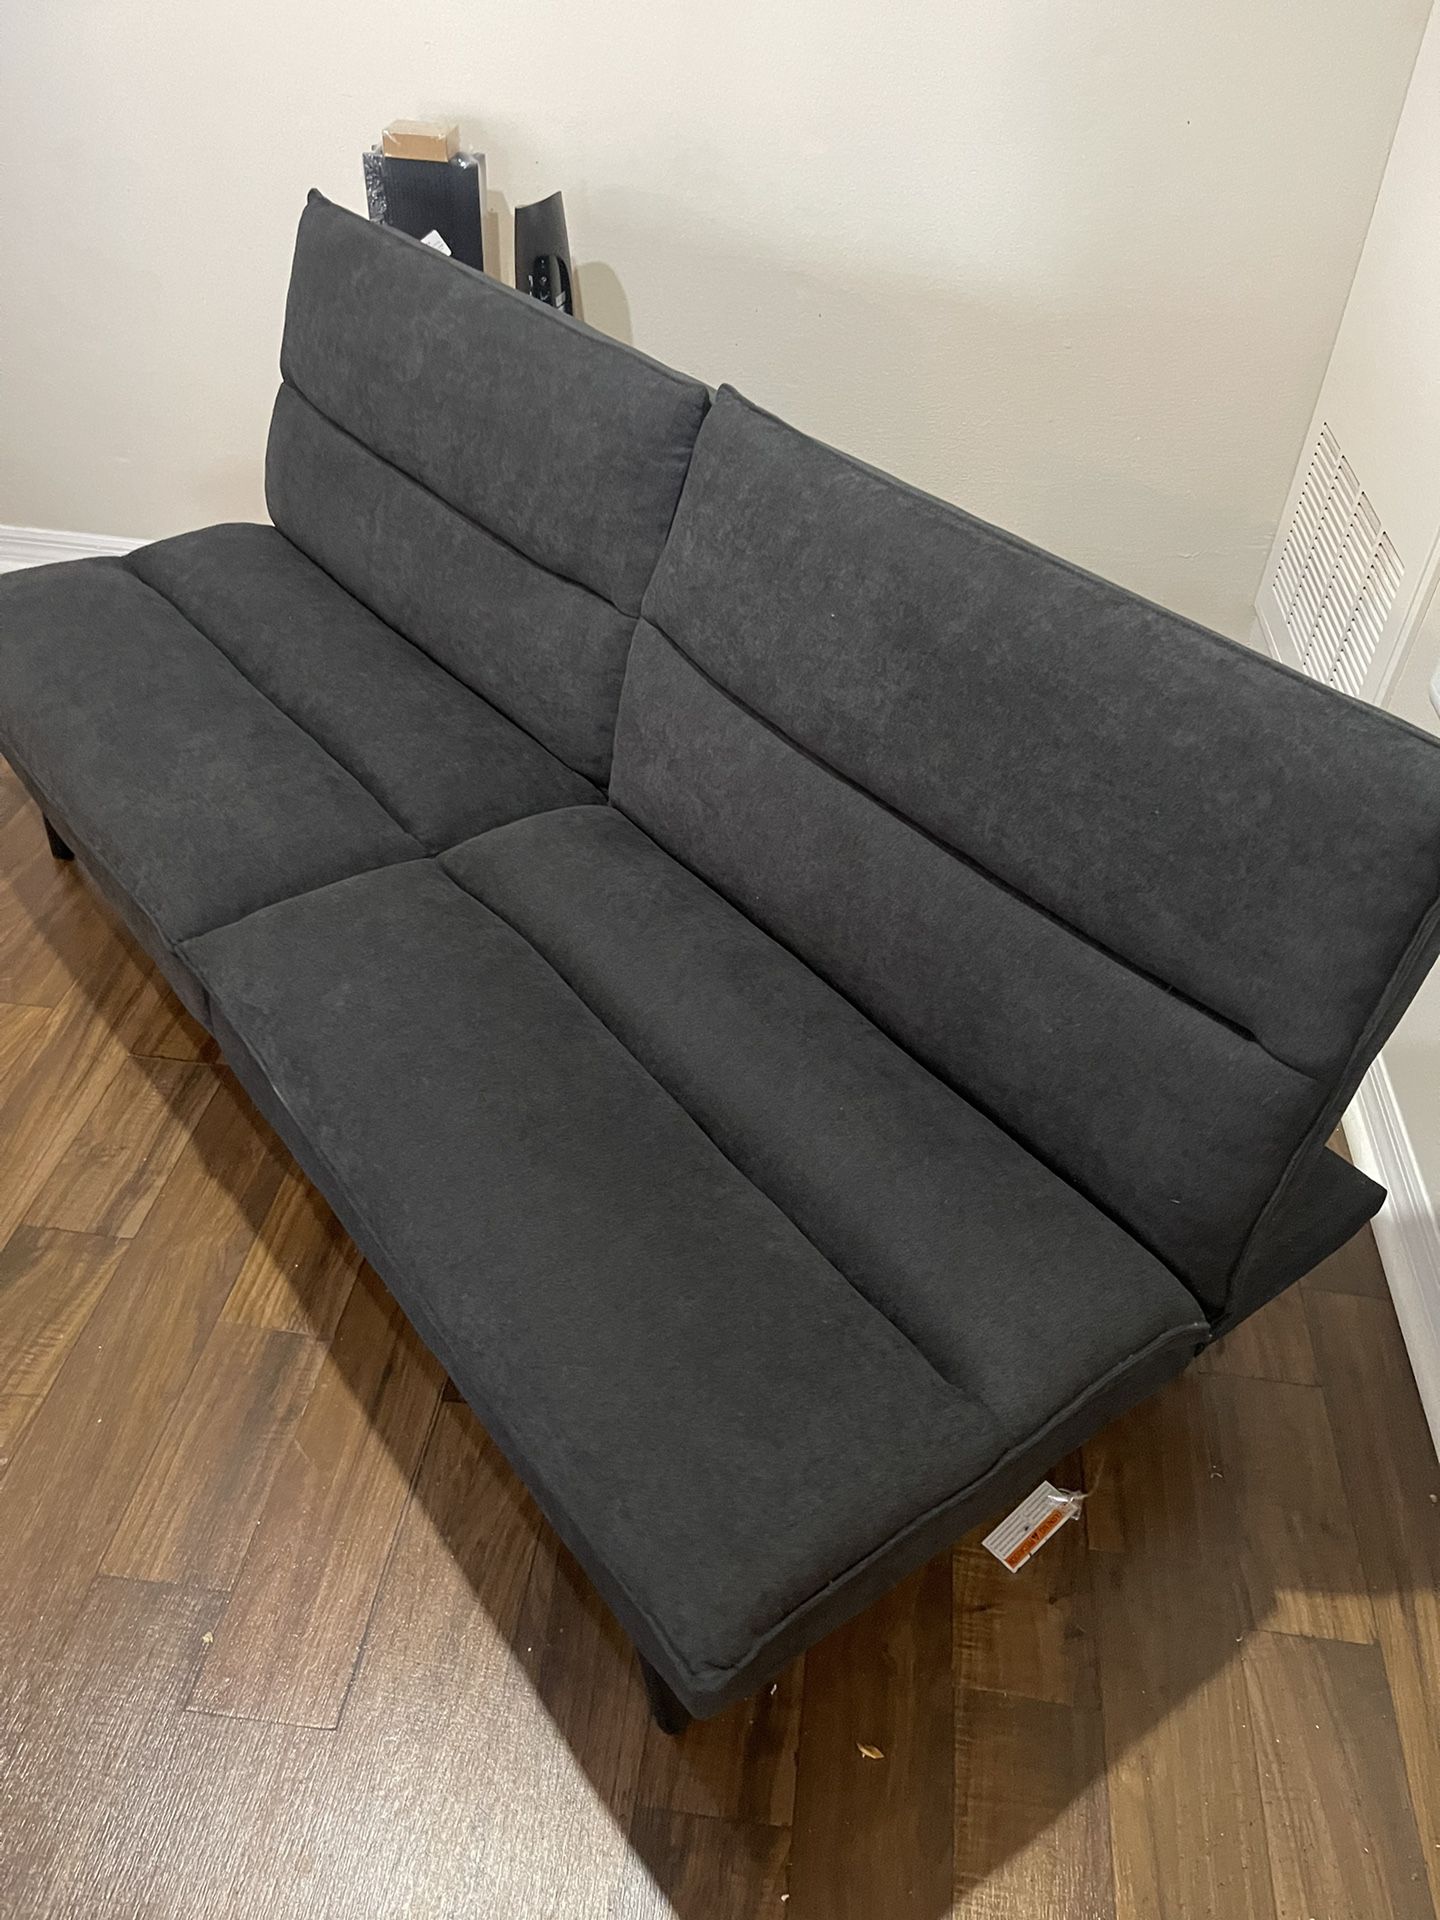 Futon Sofa For Relaxing Good Fit For The Body 